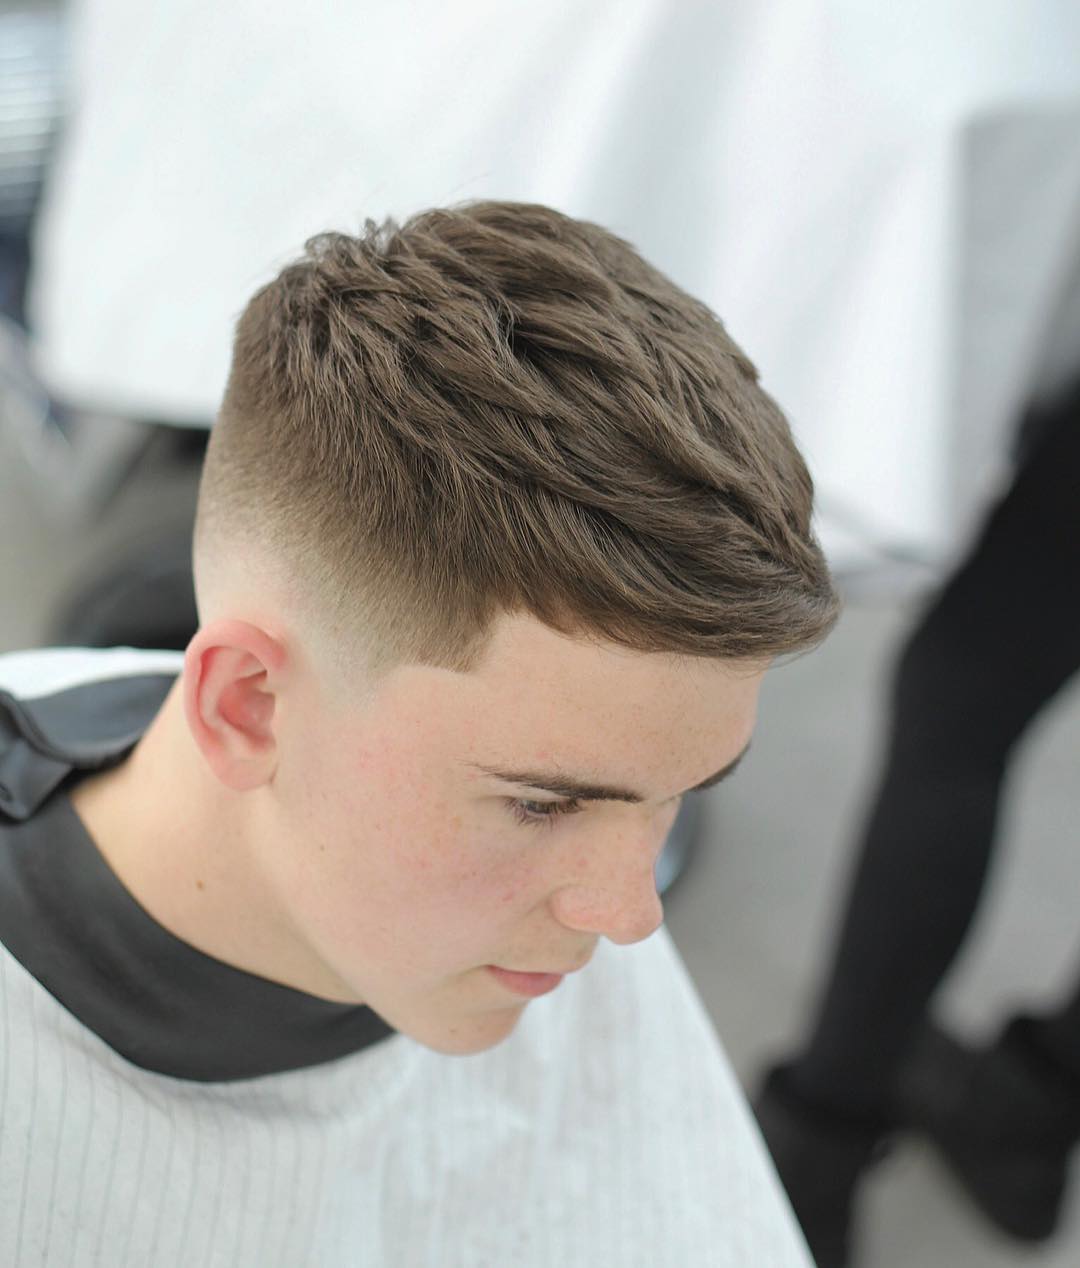 Best Fade Haircuts